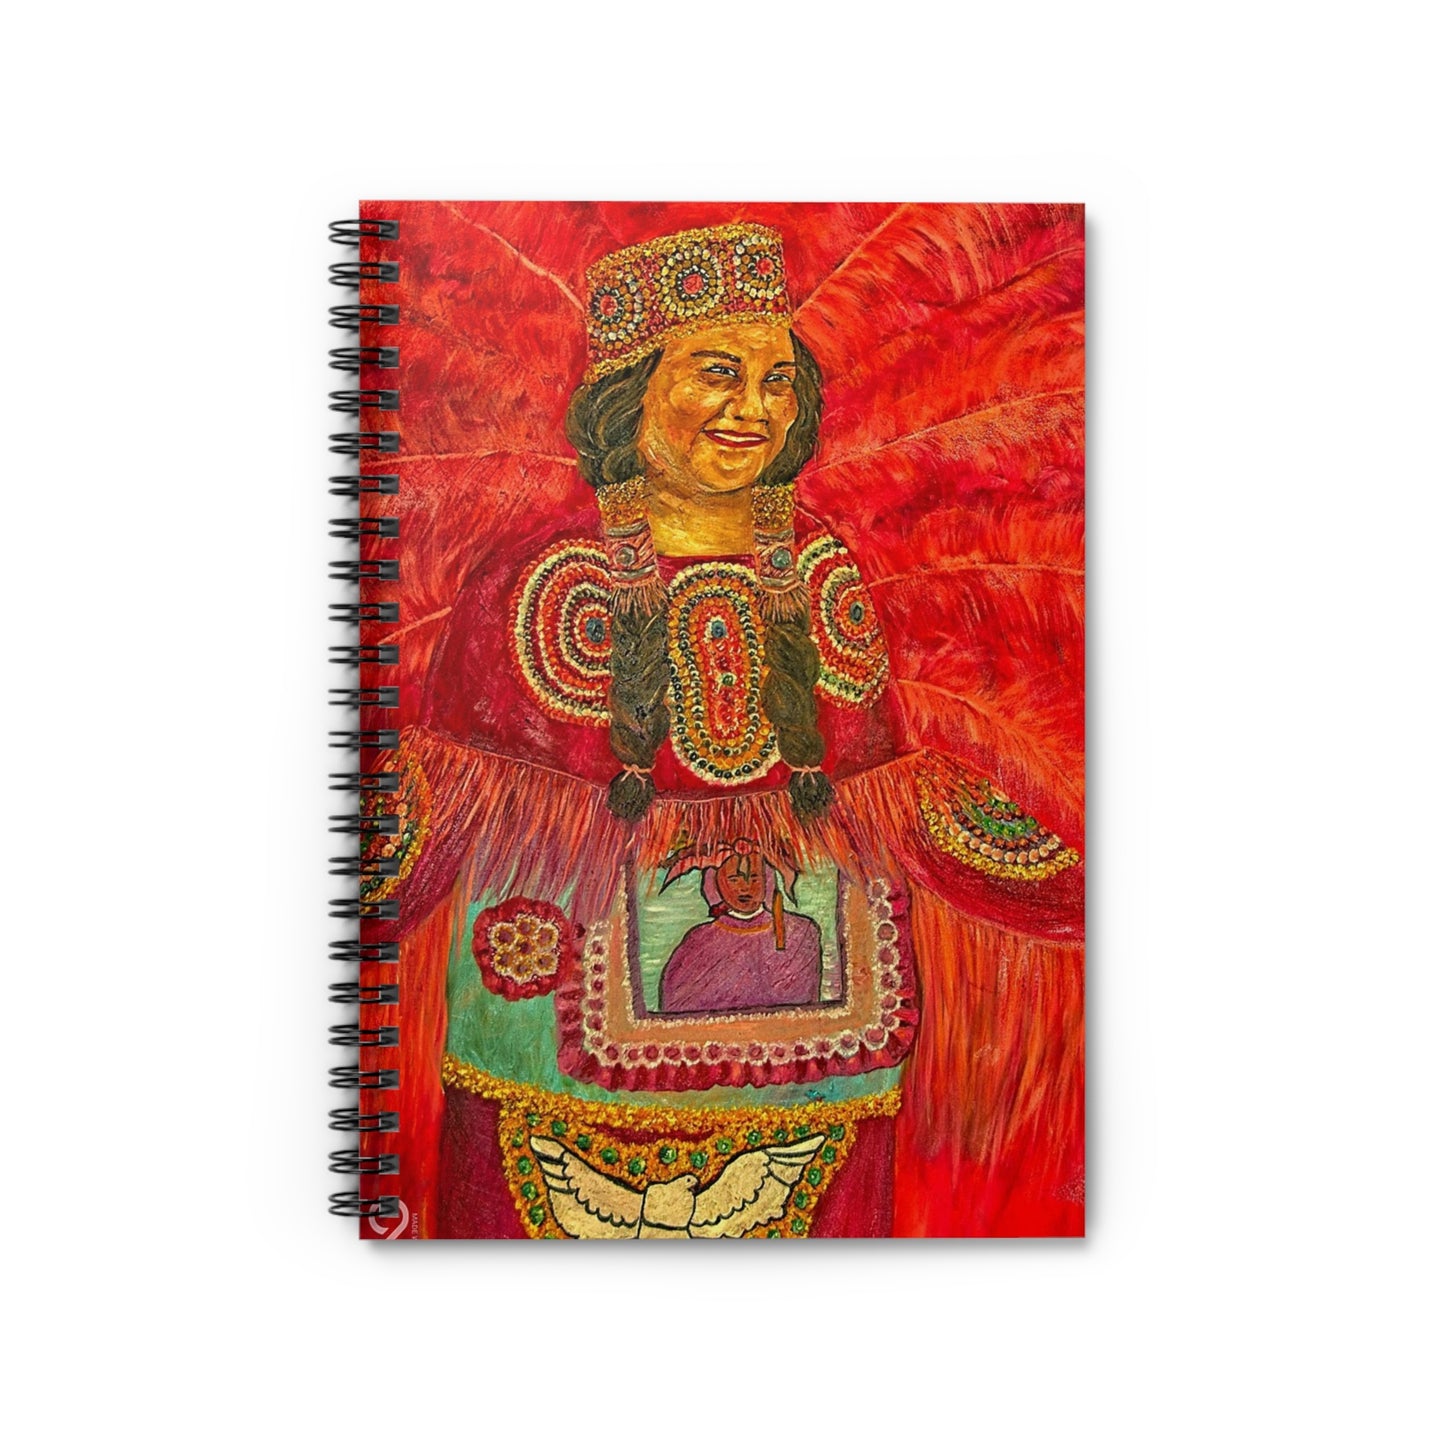 MardiGras Indian Themed Spiral Notebook - Ruled Line